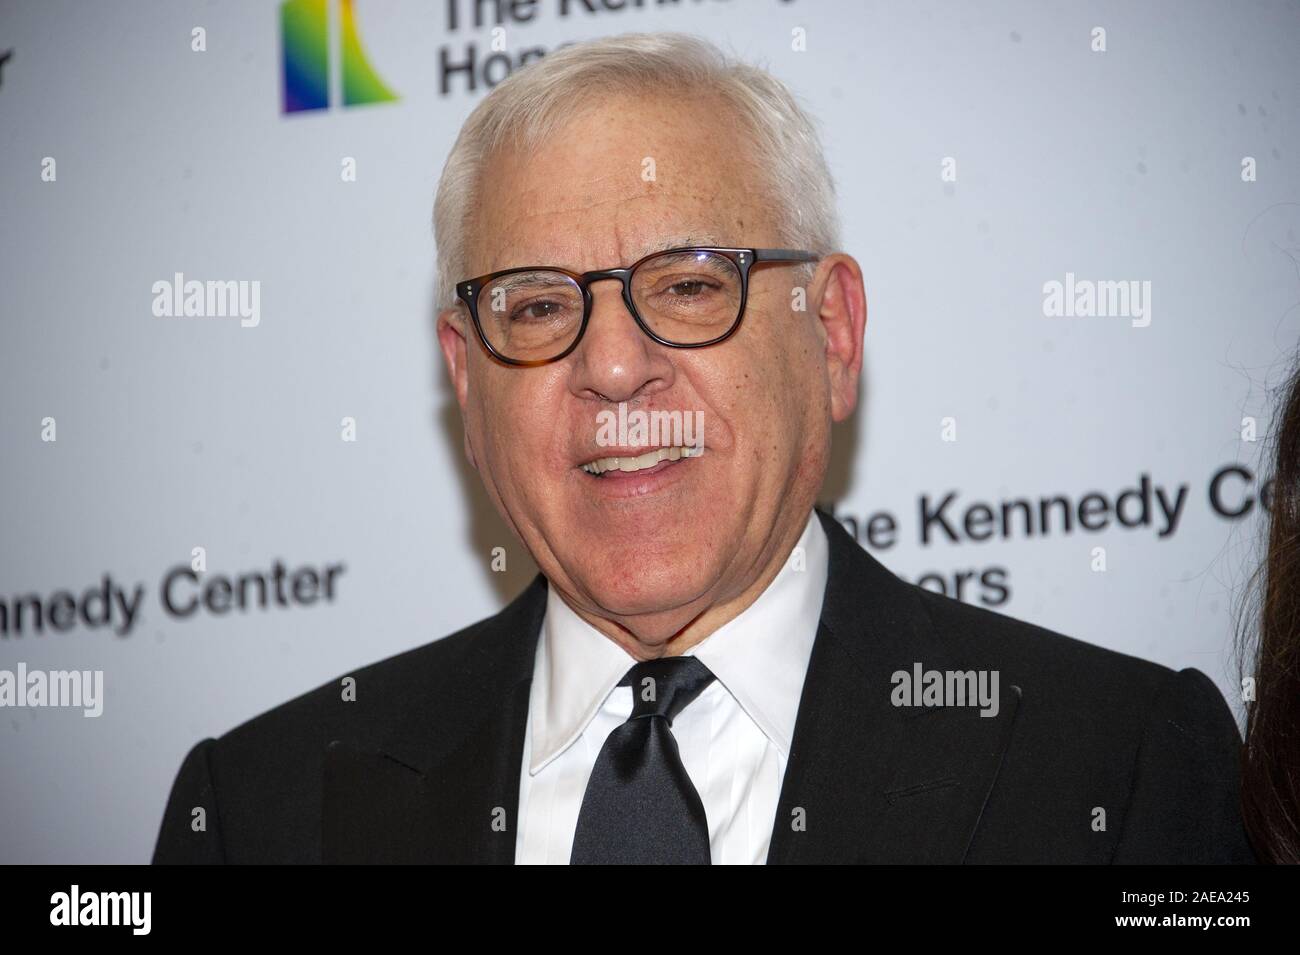 Washington DC, USA. 7th Dec, 2019. David Rubenstein arrives for the formal Artist's Dinner honoring the recipients of the 42nd Annual Kennedy Center Honors at the United States Department of State in Washington, DC on Saturday, December 7, 2019. The 2019 honorees are: Earth, Wind & Fire, Sally Field, Linda Ronstadt, Sesame Street, and Michael Tilson Thomas Credit: Ron Sachs/CNP/ZUMA Wire/Alamy Live News Stock Photo